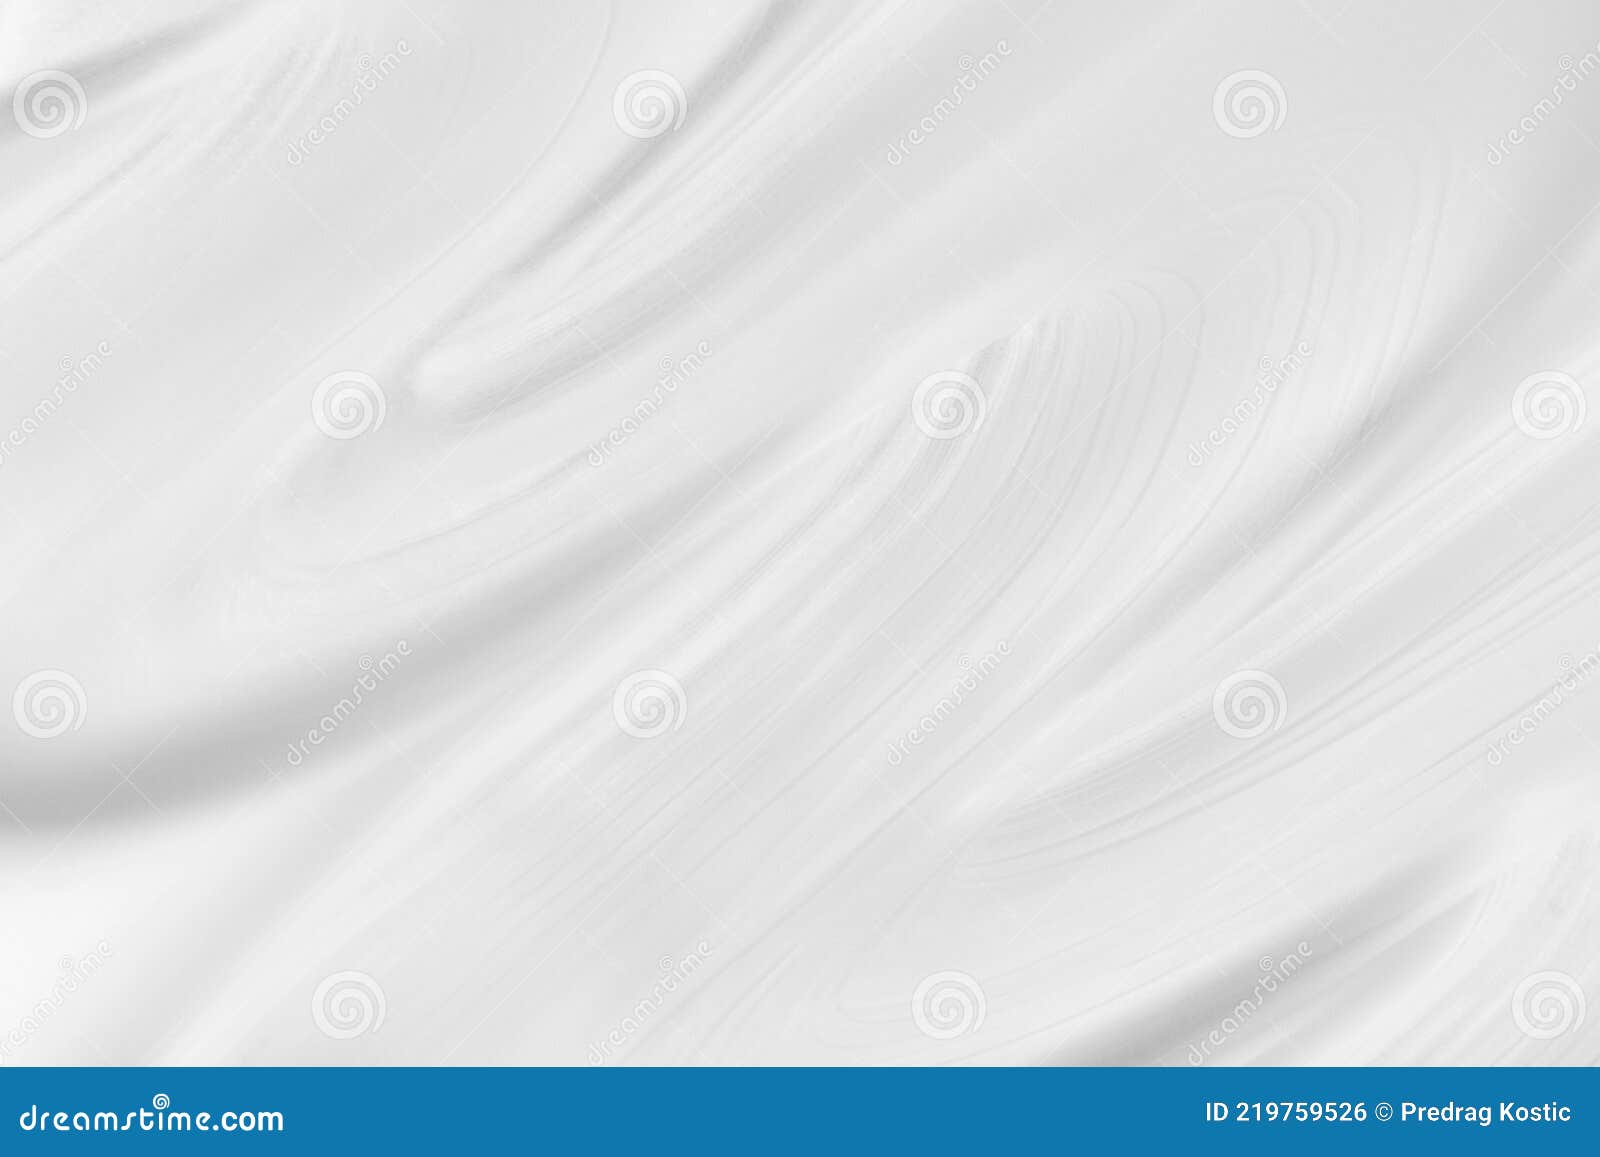 white wall texture, abstract pattern, wave wavy modern.